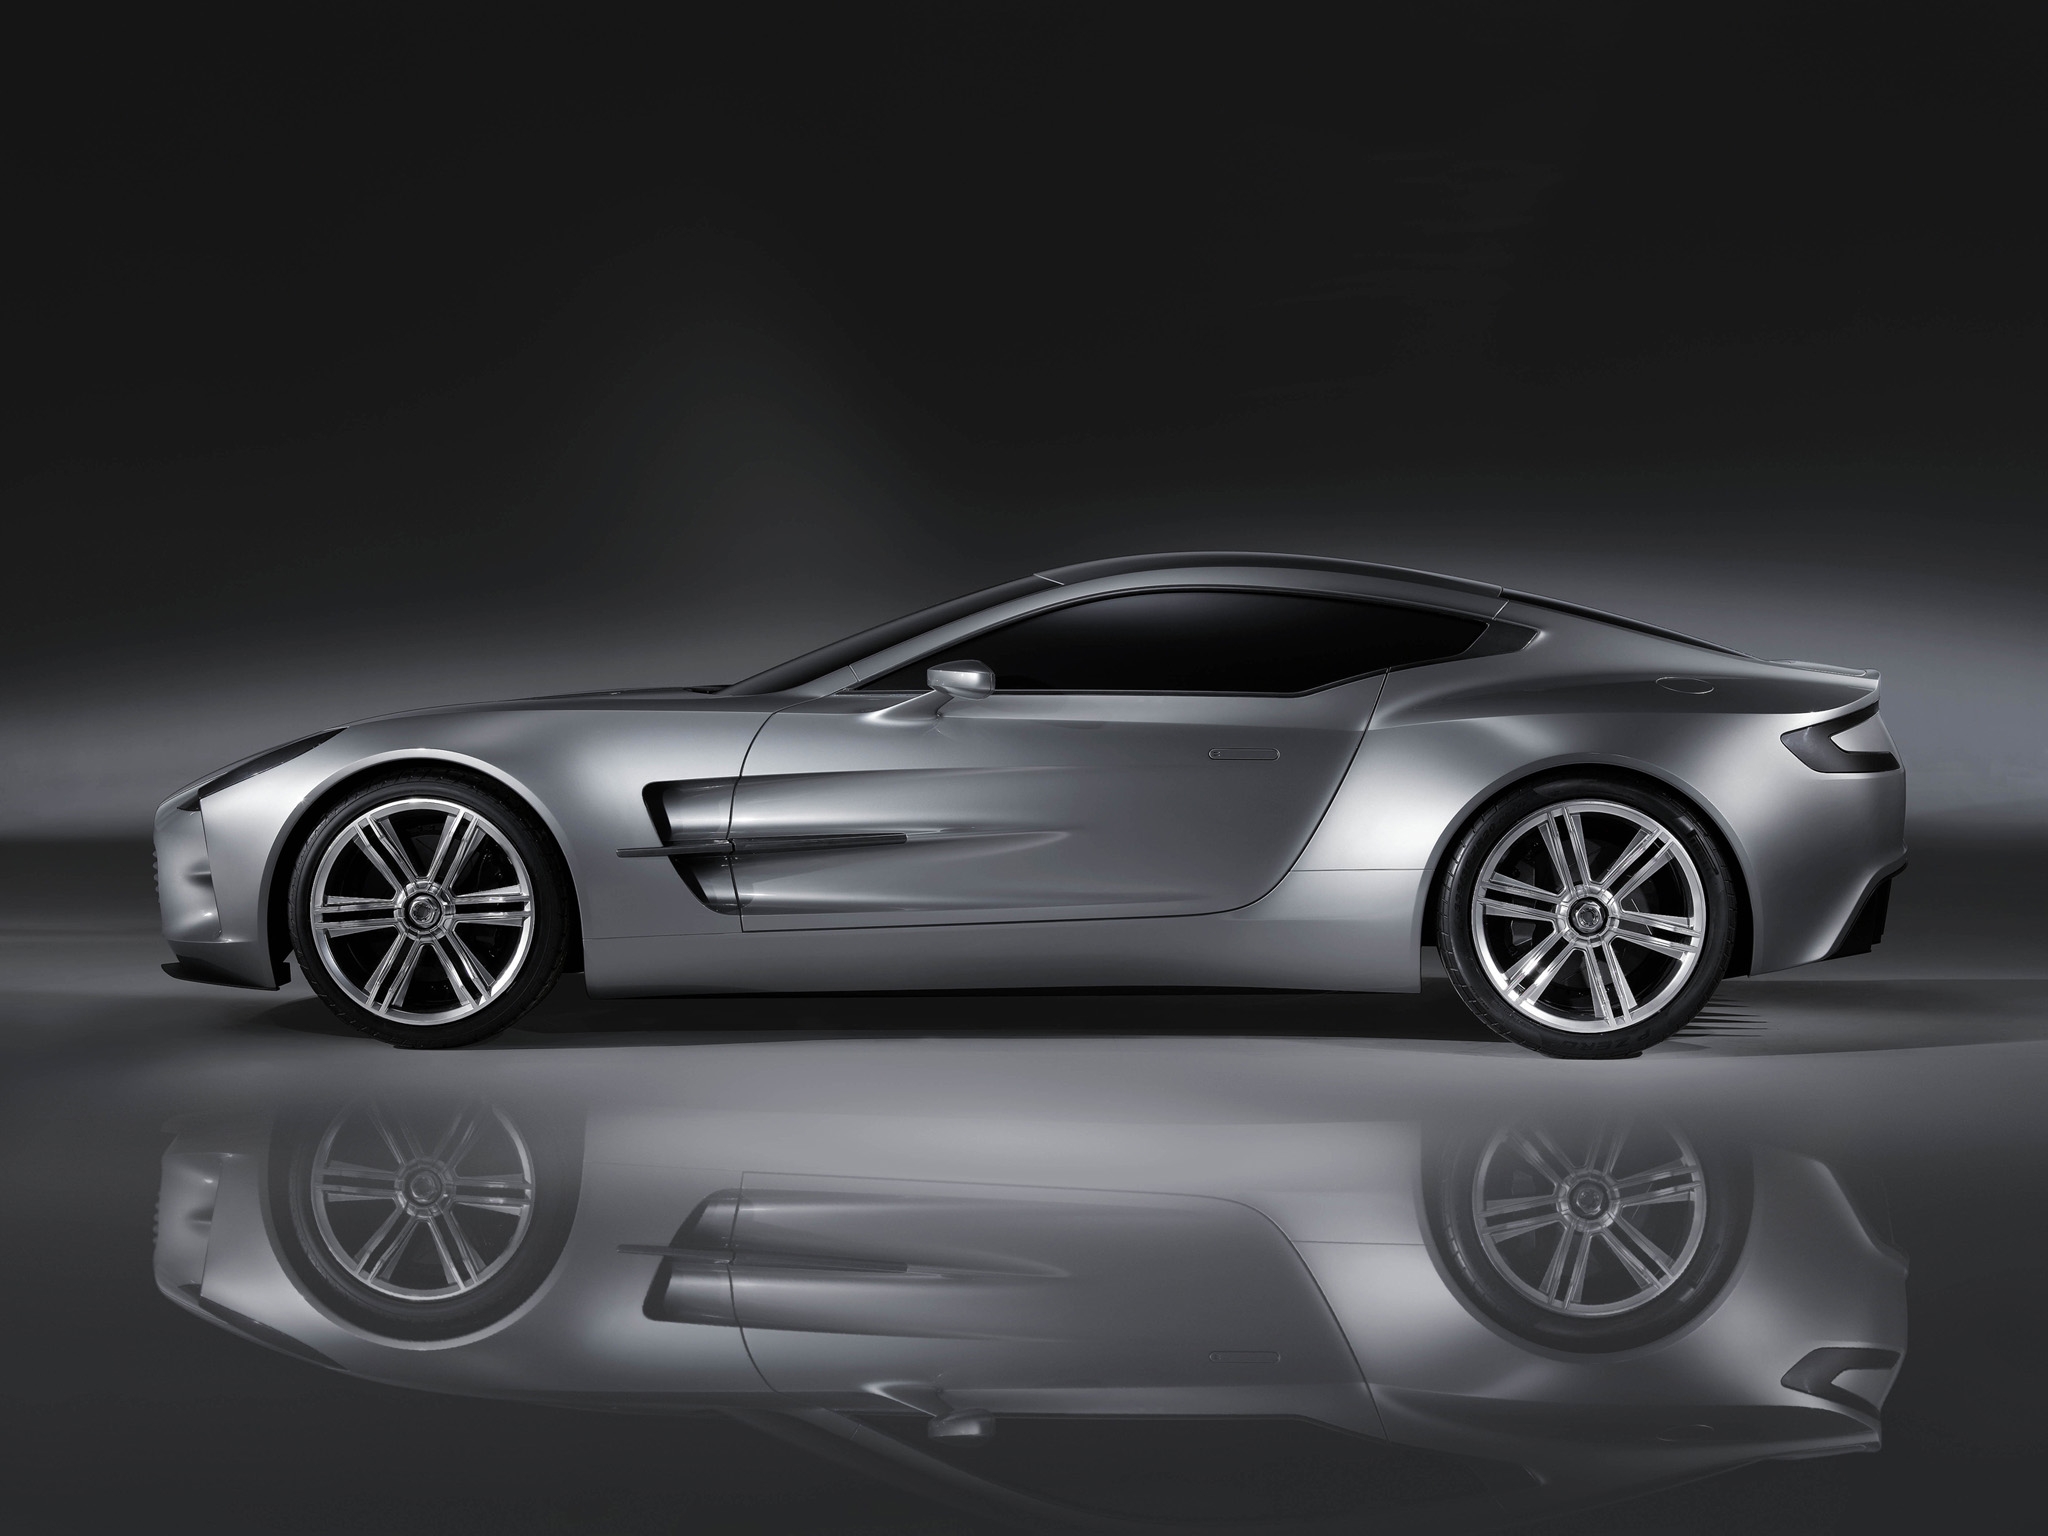 aston martin, one 77, cars, reflection, grey, side view, 2008, concept car Full HD